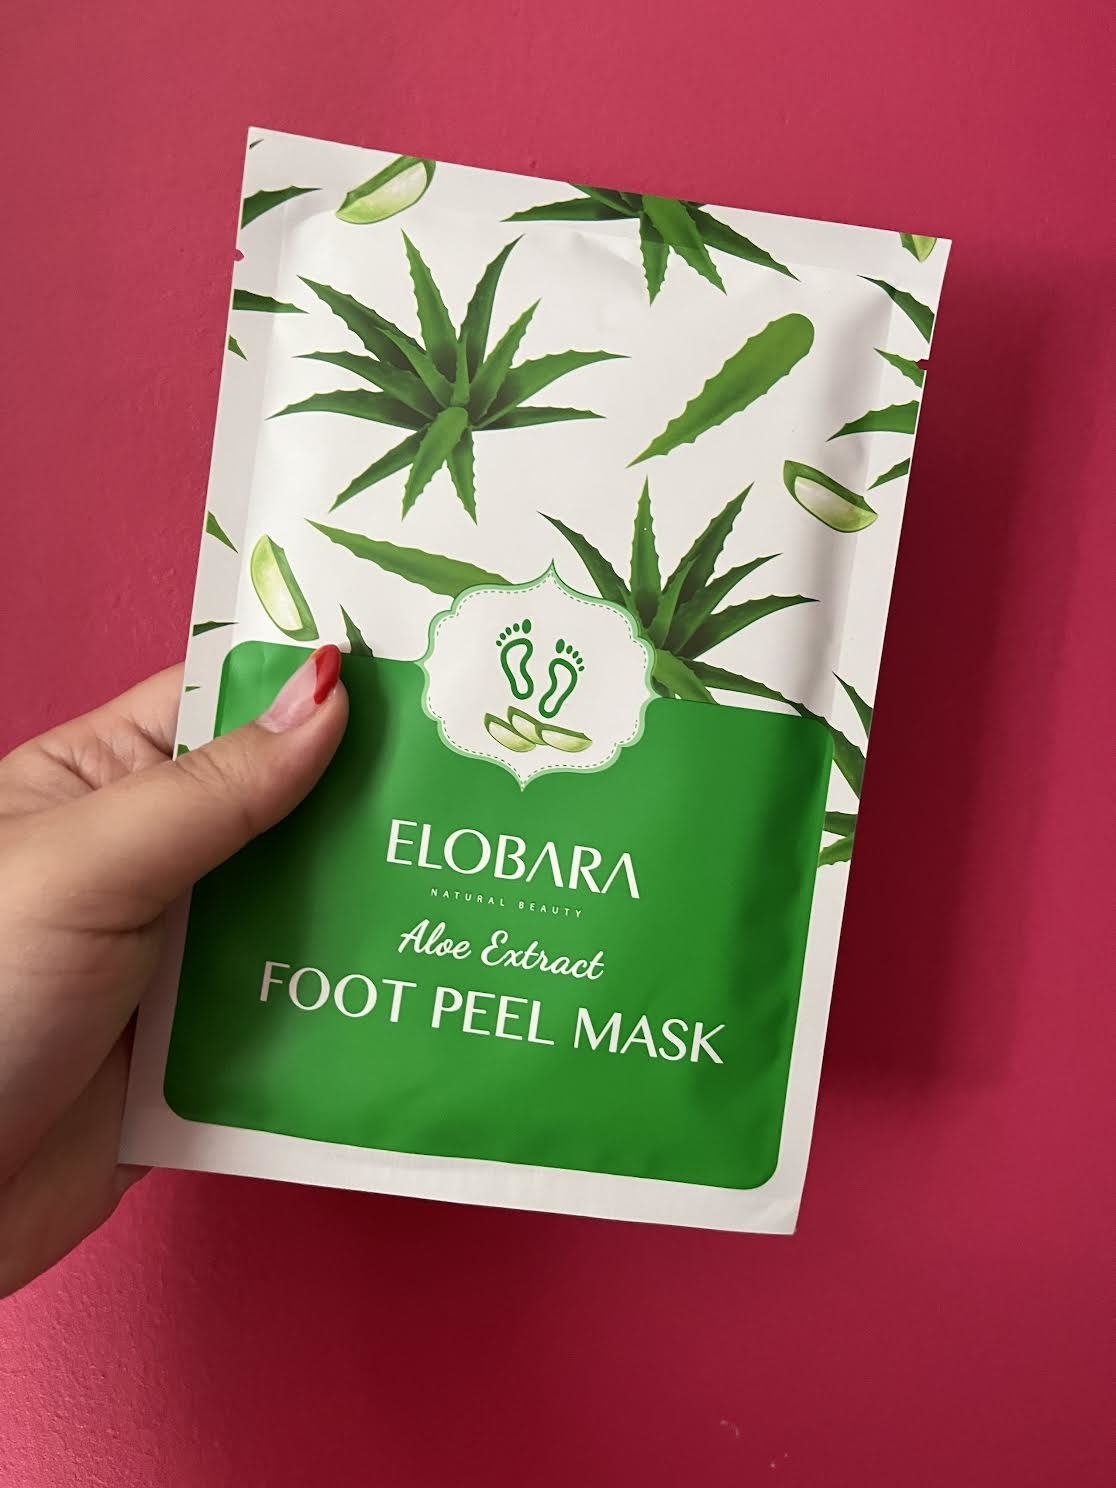 Bianca holding up a packet of the foot mask